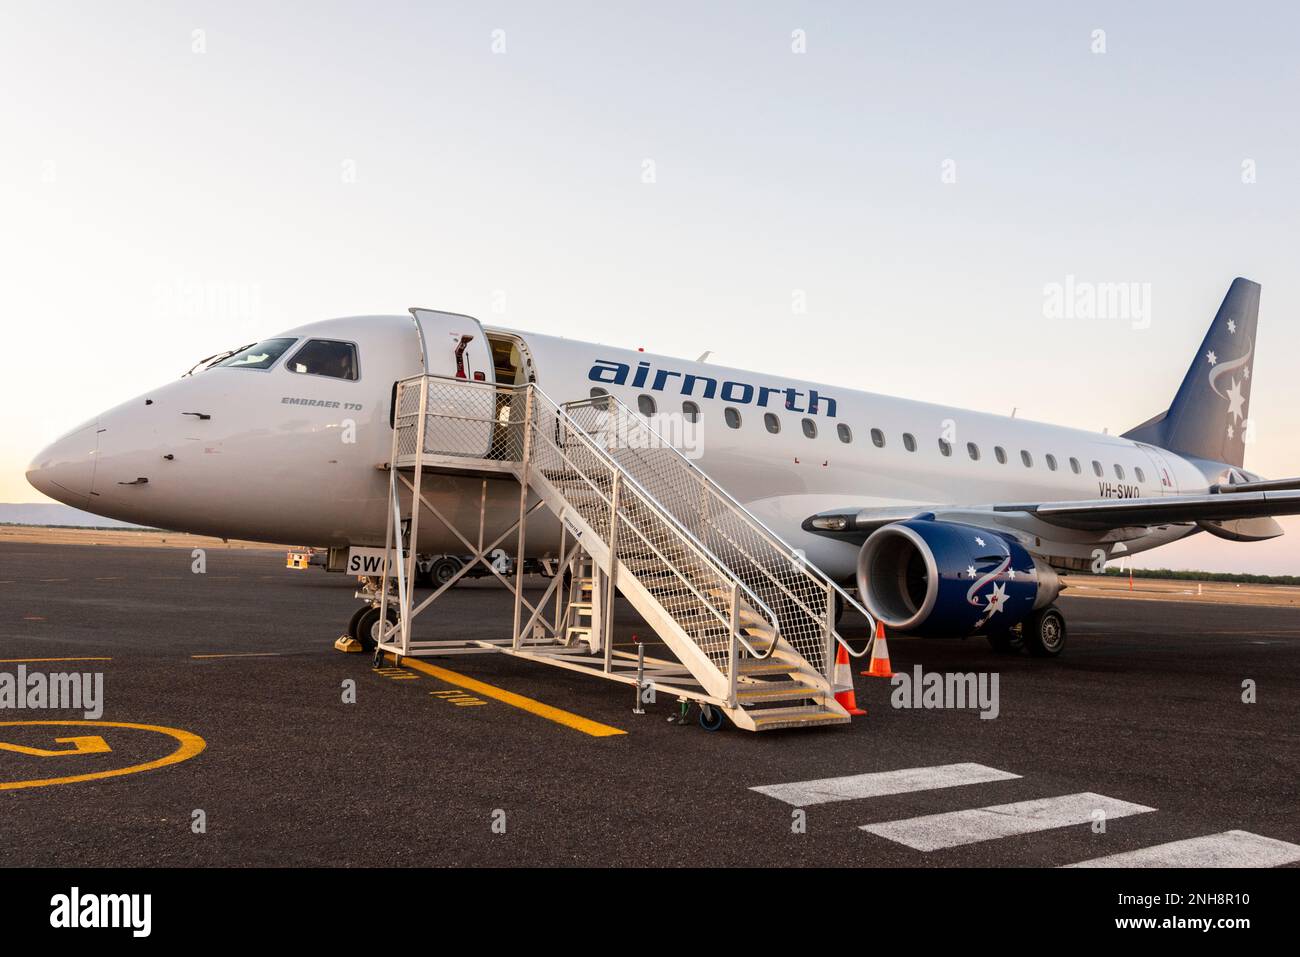 An Embraer 170 Airnorth aircraft on the apron at Kununurra airport - East Kimberley Regional Airport in the Kimberley region of Western Australia.  Ai Stock Photo